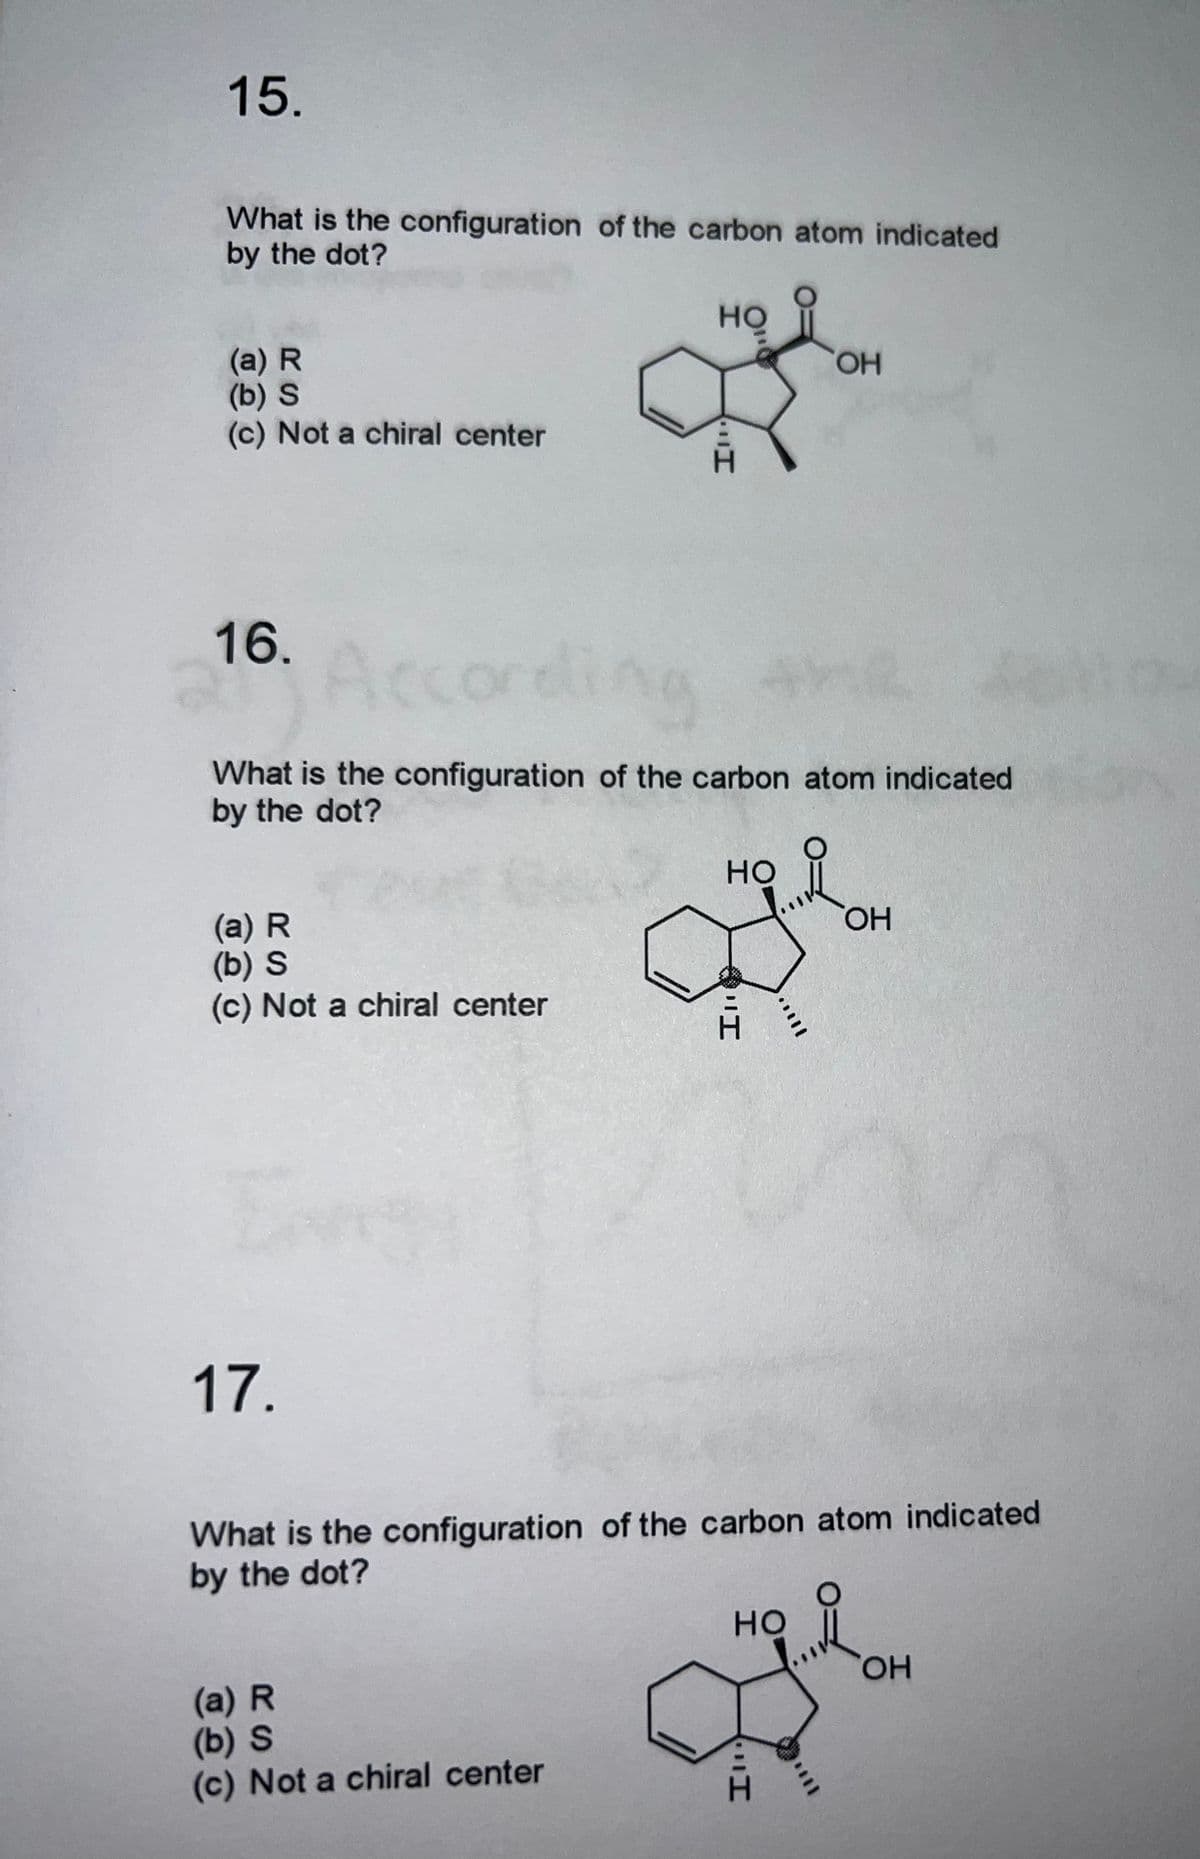 15.
What is the configuration of the carbon atom indicated
by the dot?
но
(a) R
(b) S
(c) Not a chiral center
16.
Acco
core
(a) R
(b) S
(c) Not a chiral center
17.
What is the configuration of the carbon atom indicated
by the dot?
Ill
(a) R
(b) S
(c) Not a chiral center
HO
H
OH
What is the configuration of the carbon atom indicated
by the dot?
HO
I
OH
OH